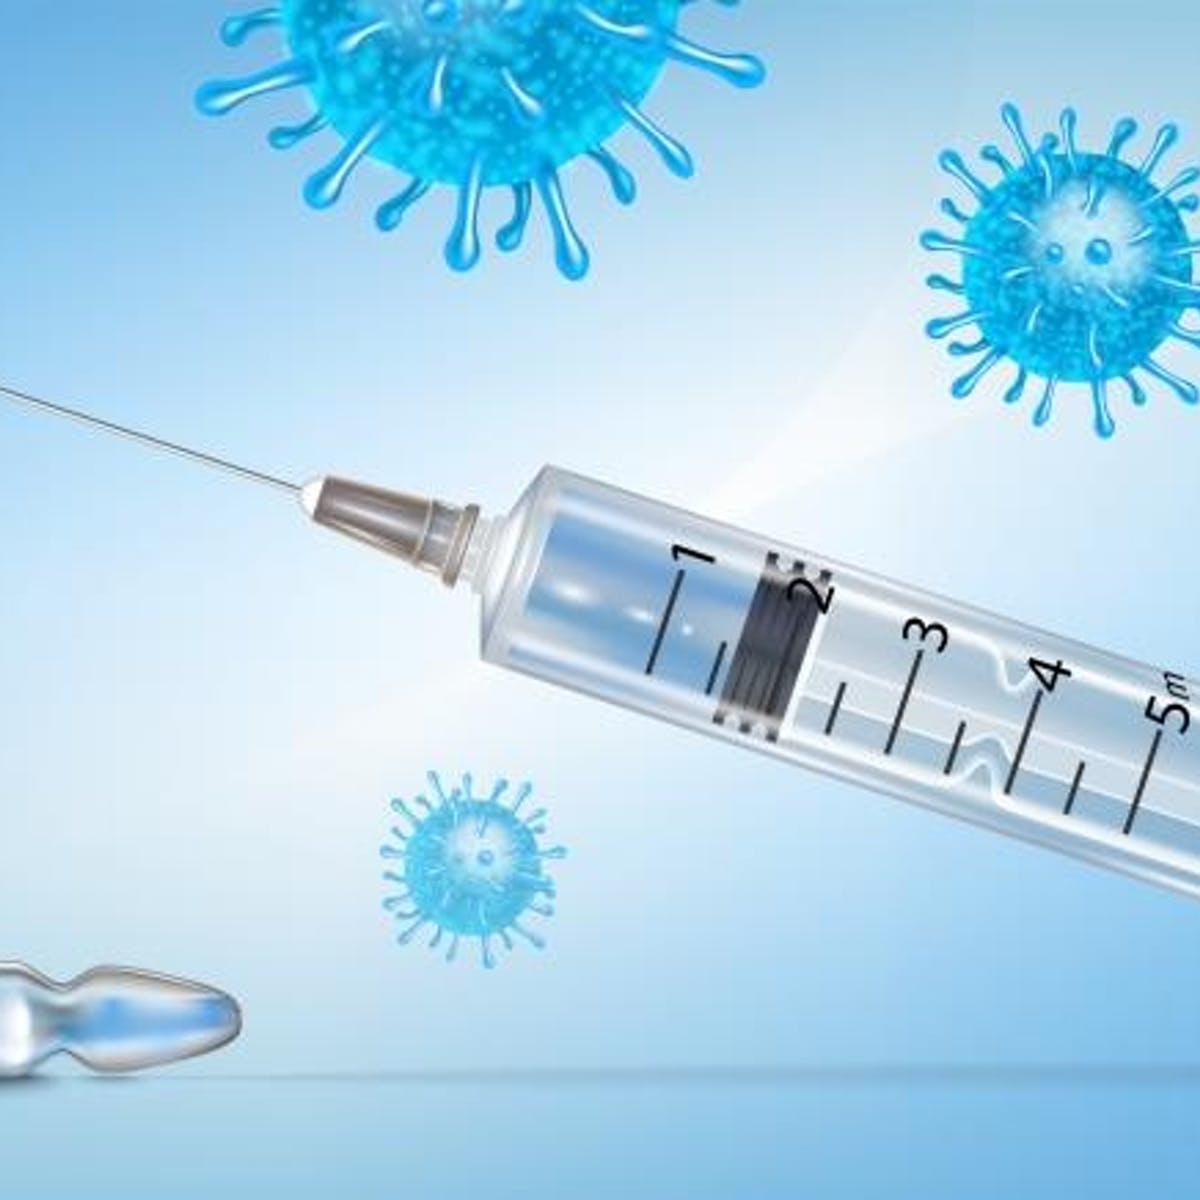 HR Insights – What President Biden’s Vaccine Mandate Means for Employers